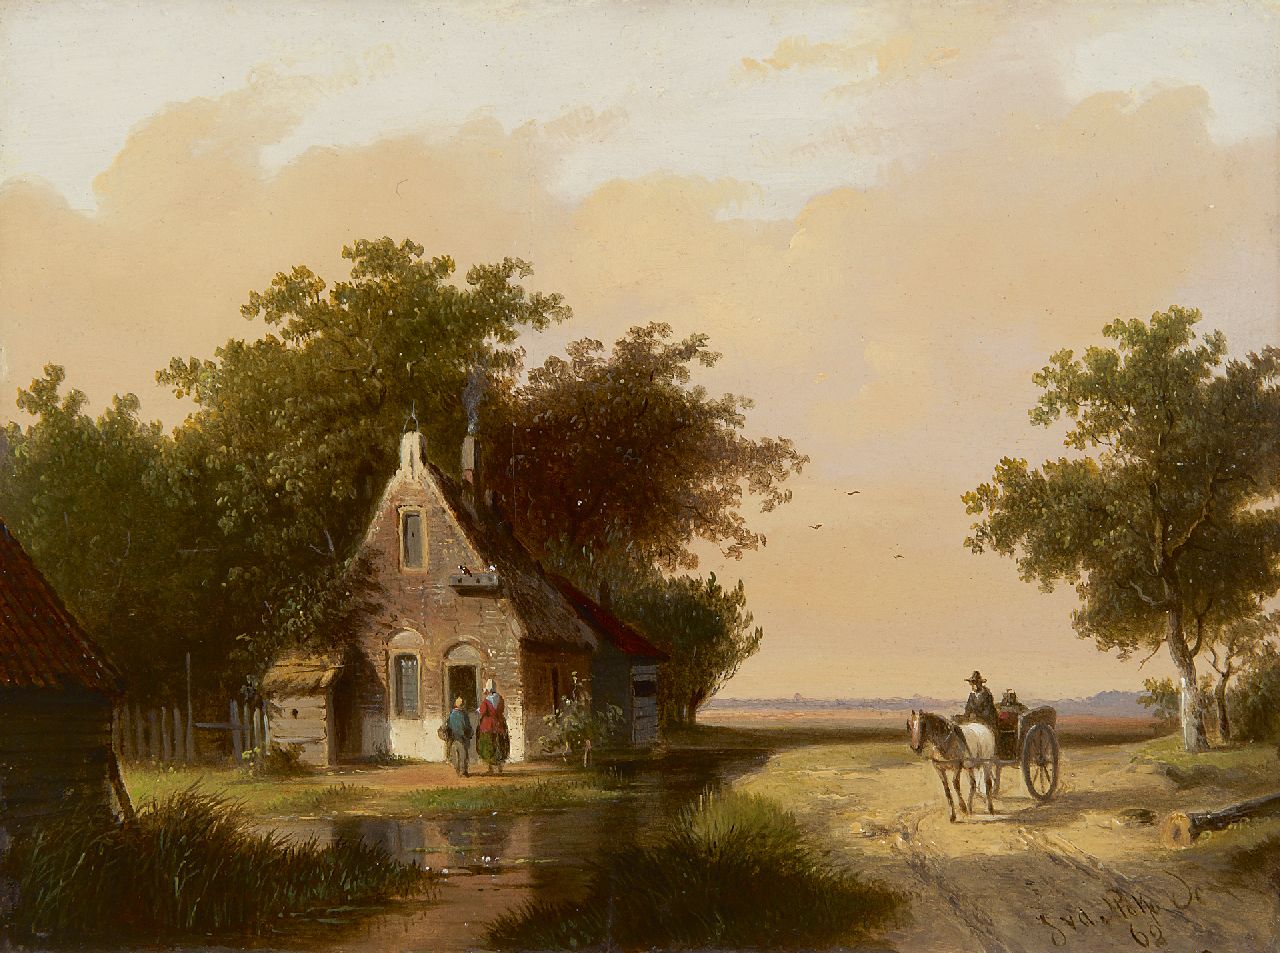 Stok J. van der | Jacobus van der Stok, Landscape with figures near a small house, oil on panel 18.9 x 25.3 cm, signed l.r. and dated '62